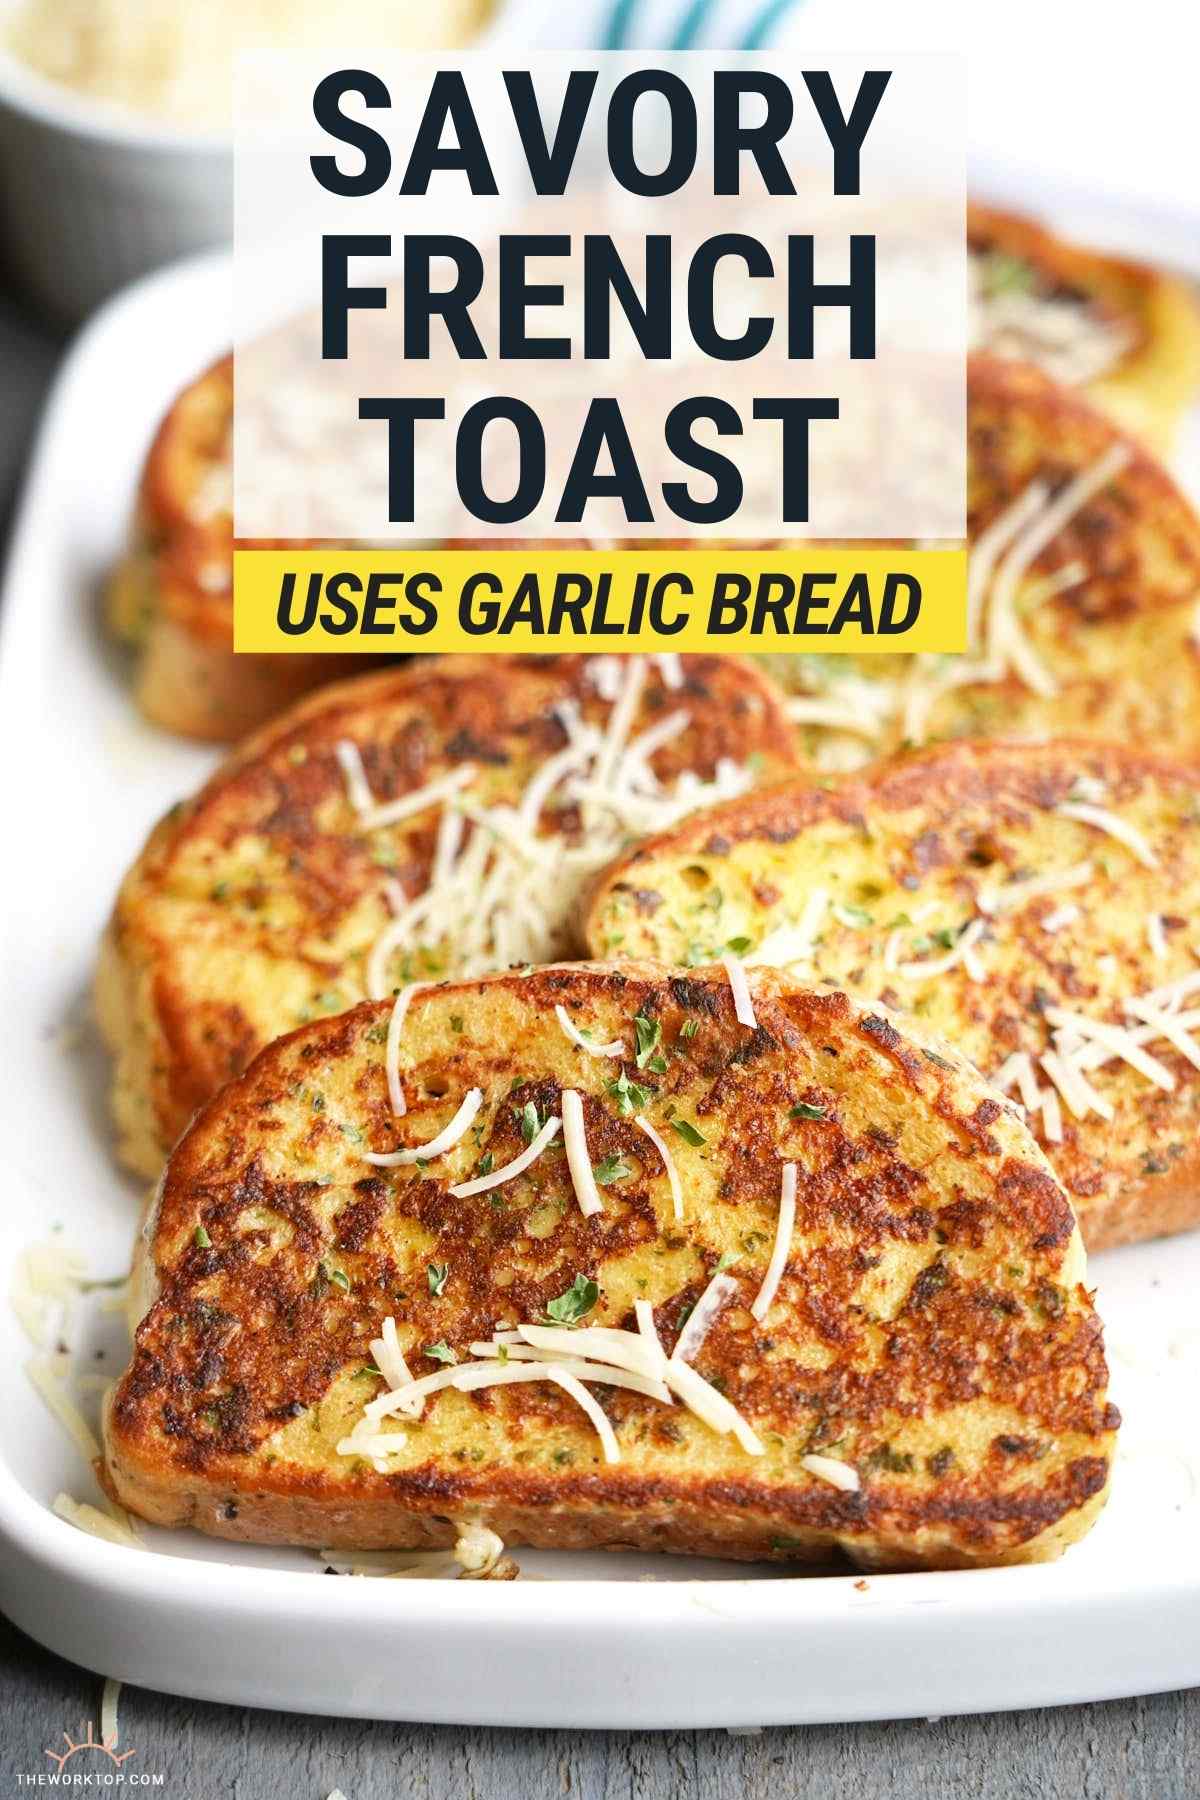 Savory French Toast with Text | The Worktop